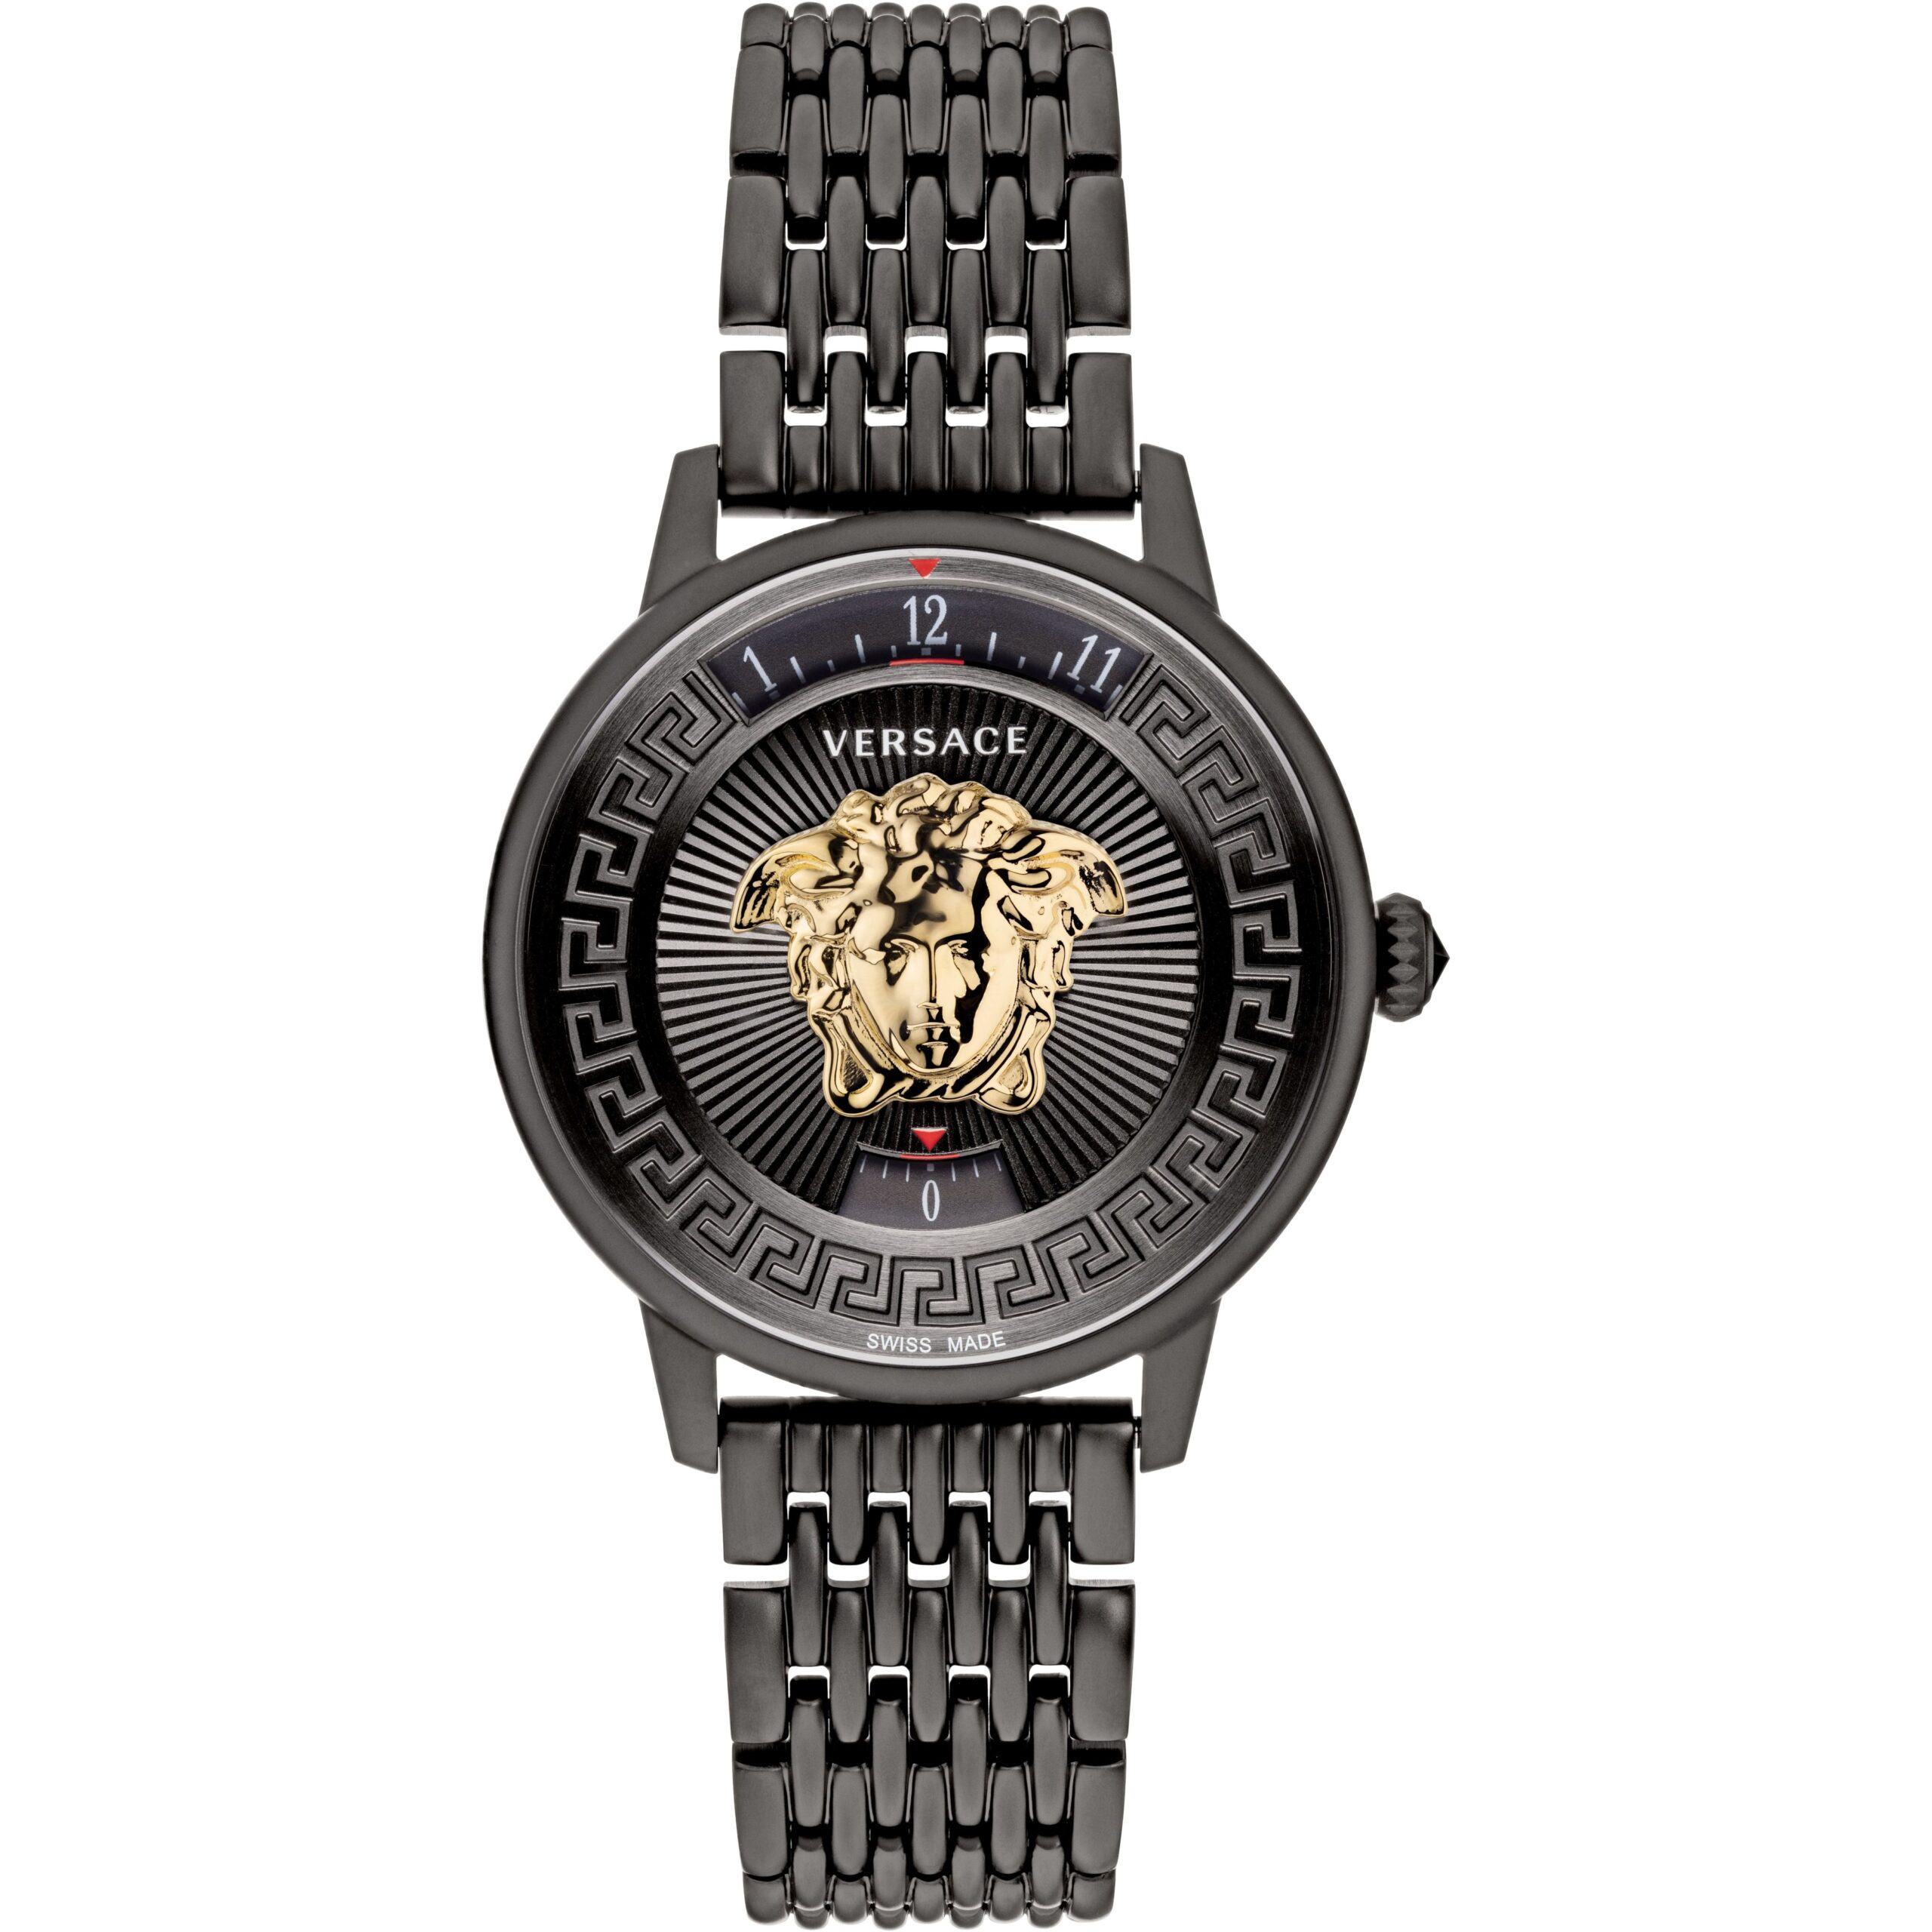 Versace watch battery replacement